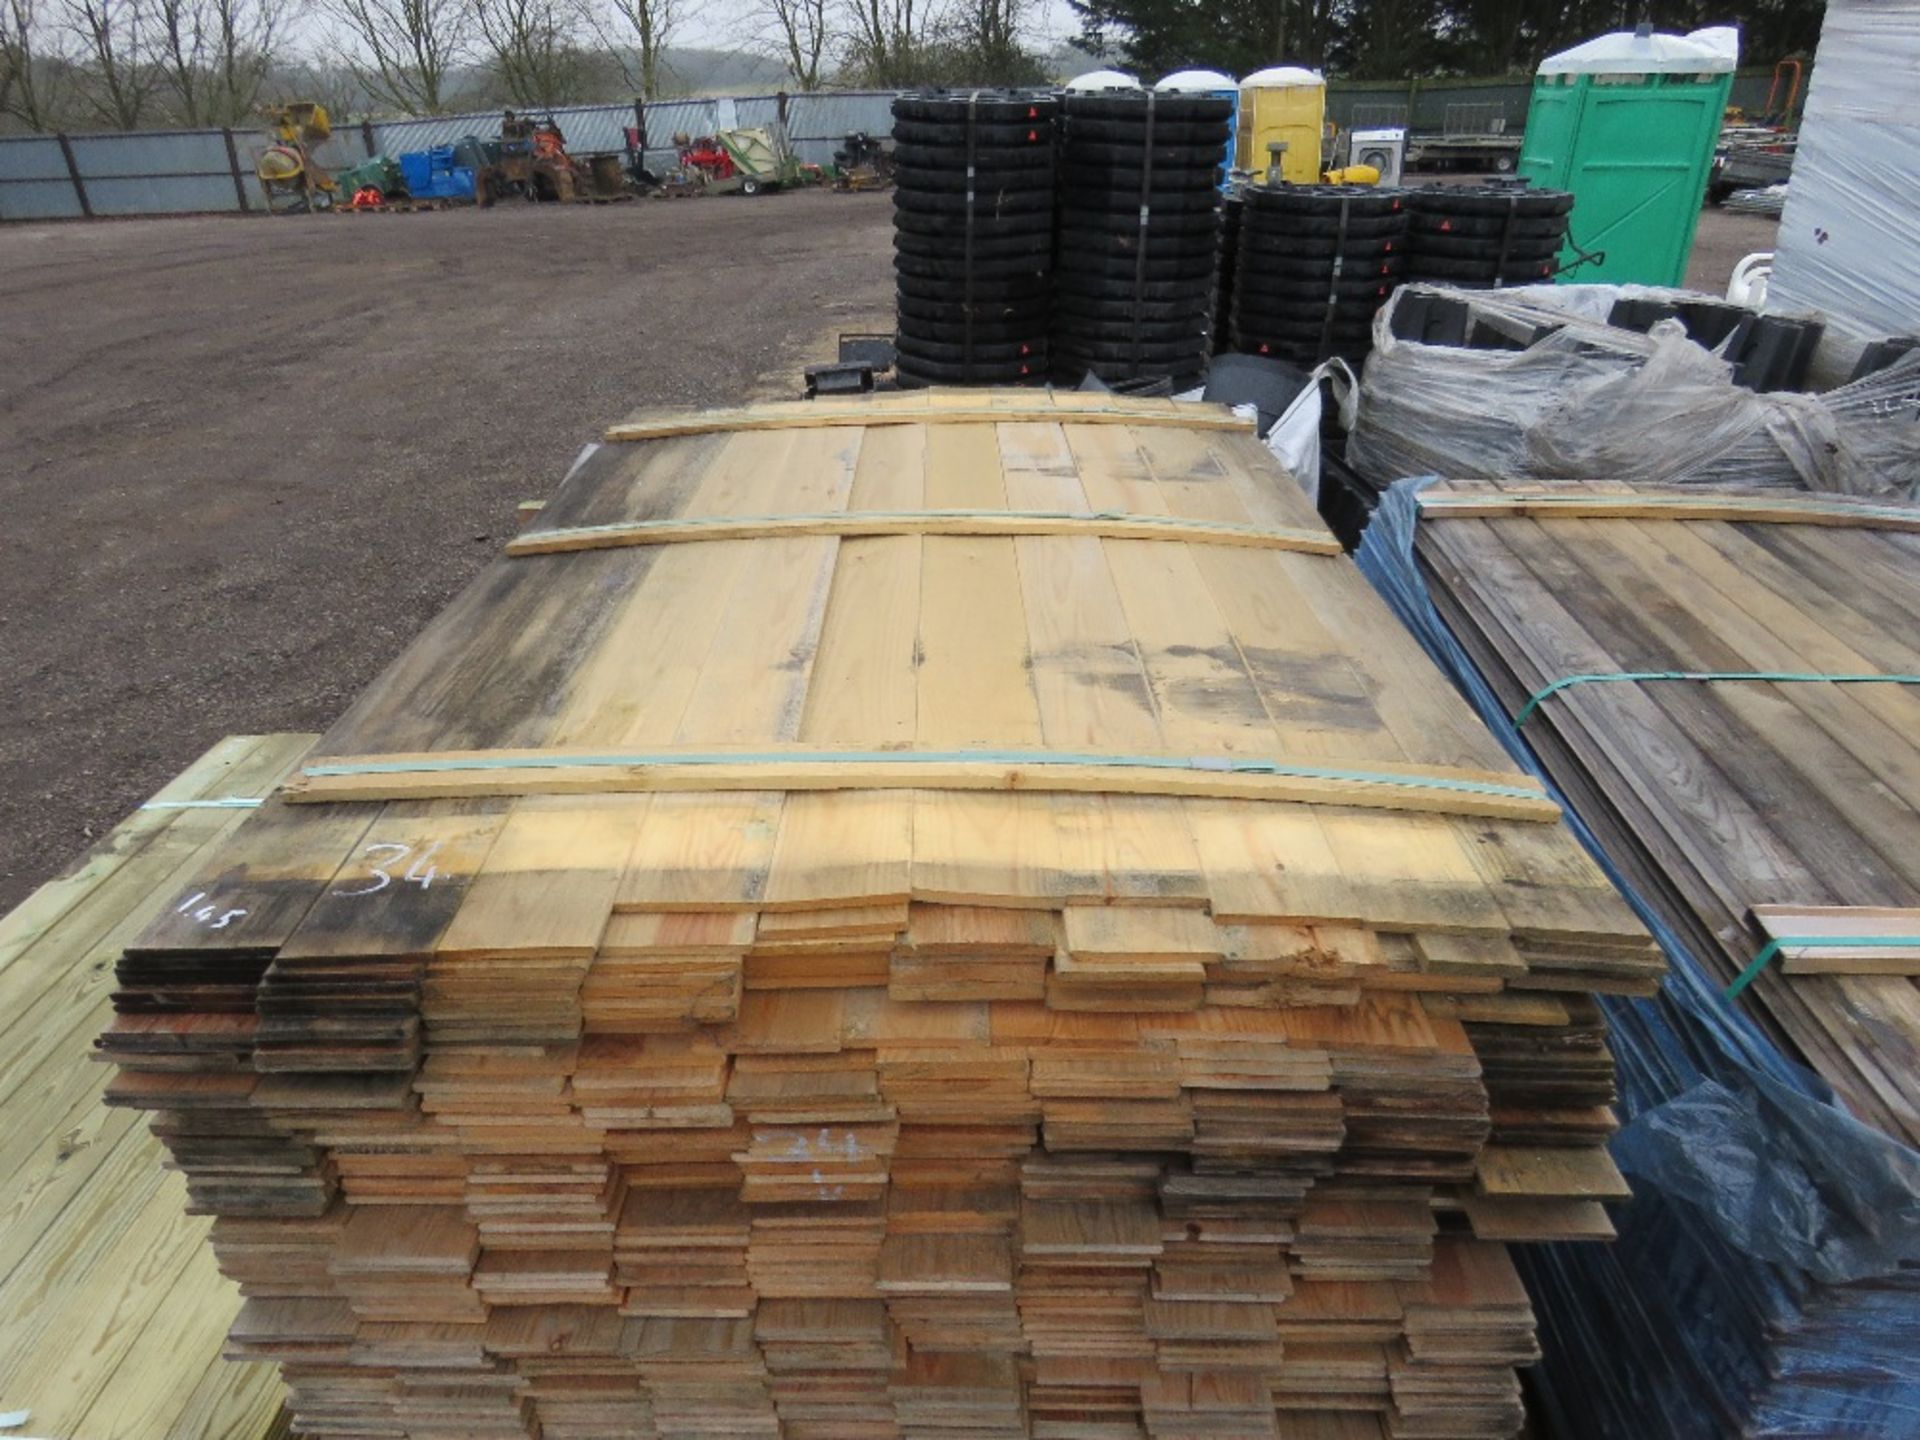 2 X PACKS OF FLAT UNTREATED TIMBER CLADDING BOARDS 1.45M & 1.75M X 10CM WIDE APPROX. - Image 3 of 4